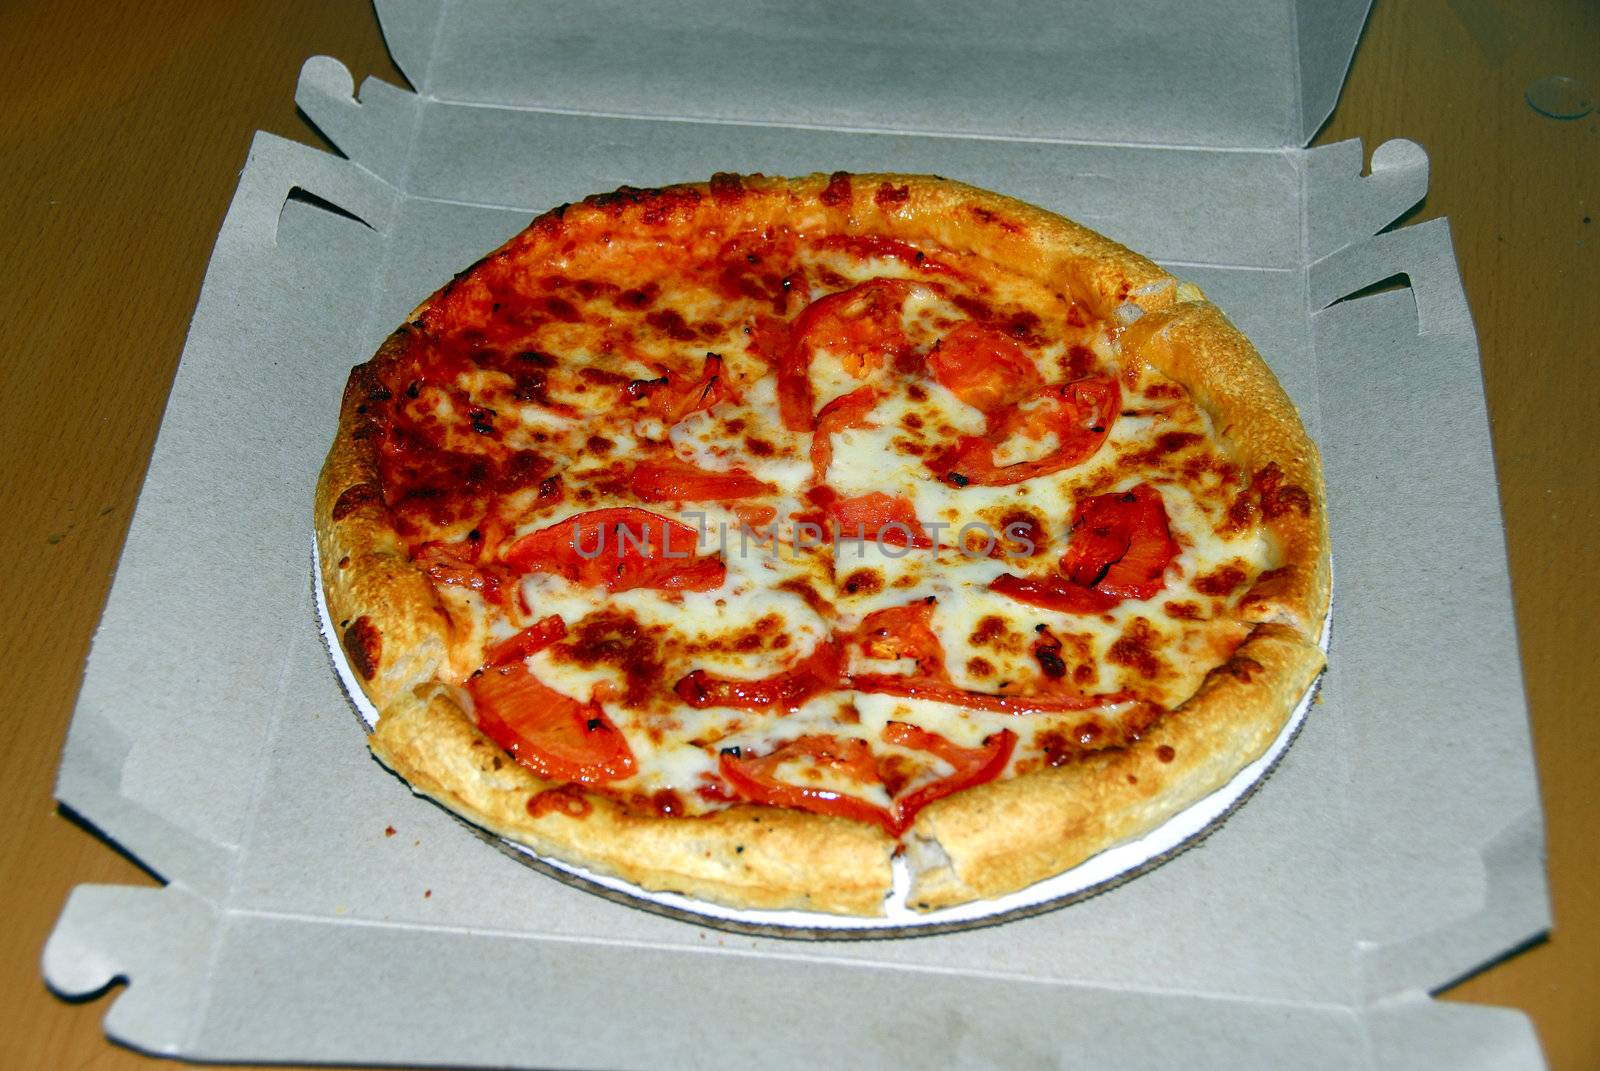 Freshly baked hot pizza after delivery and ready to eat